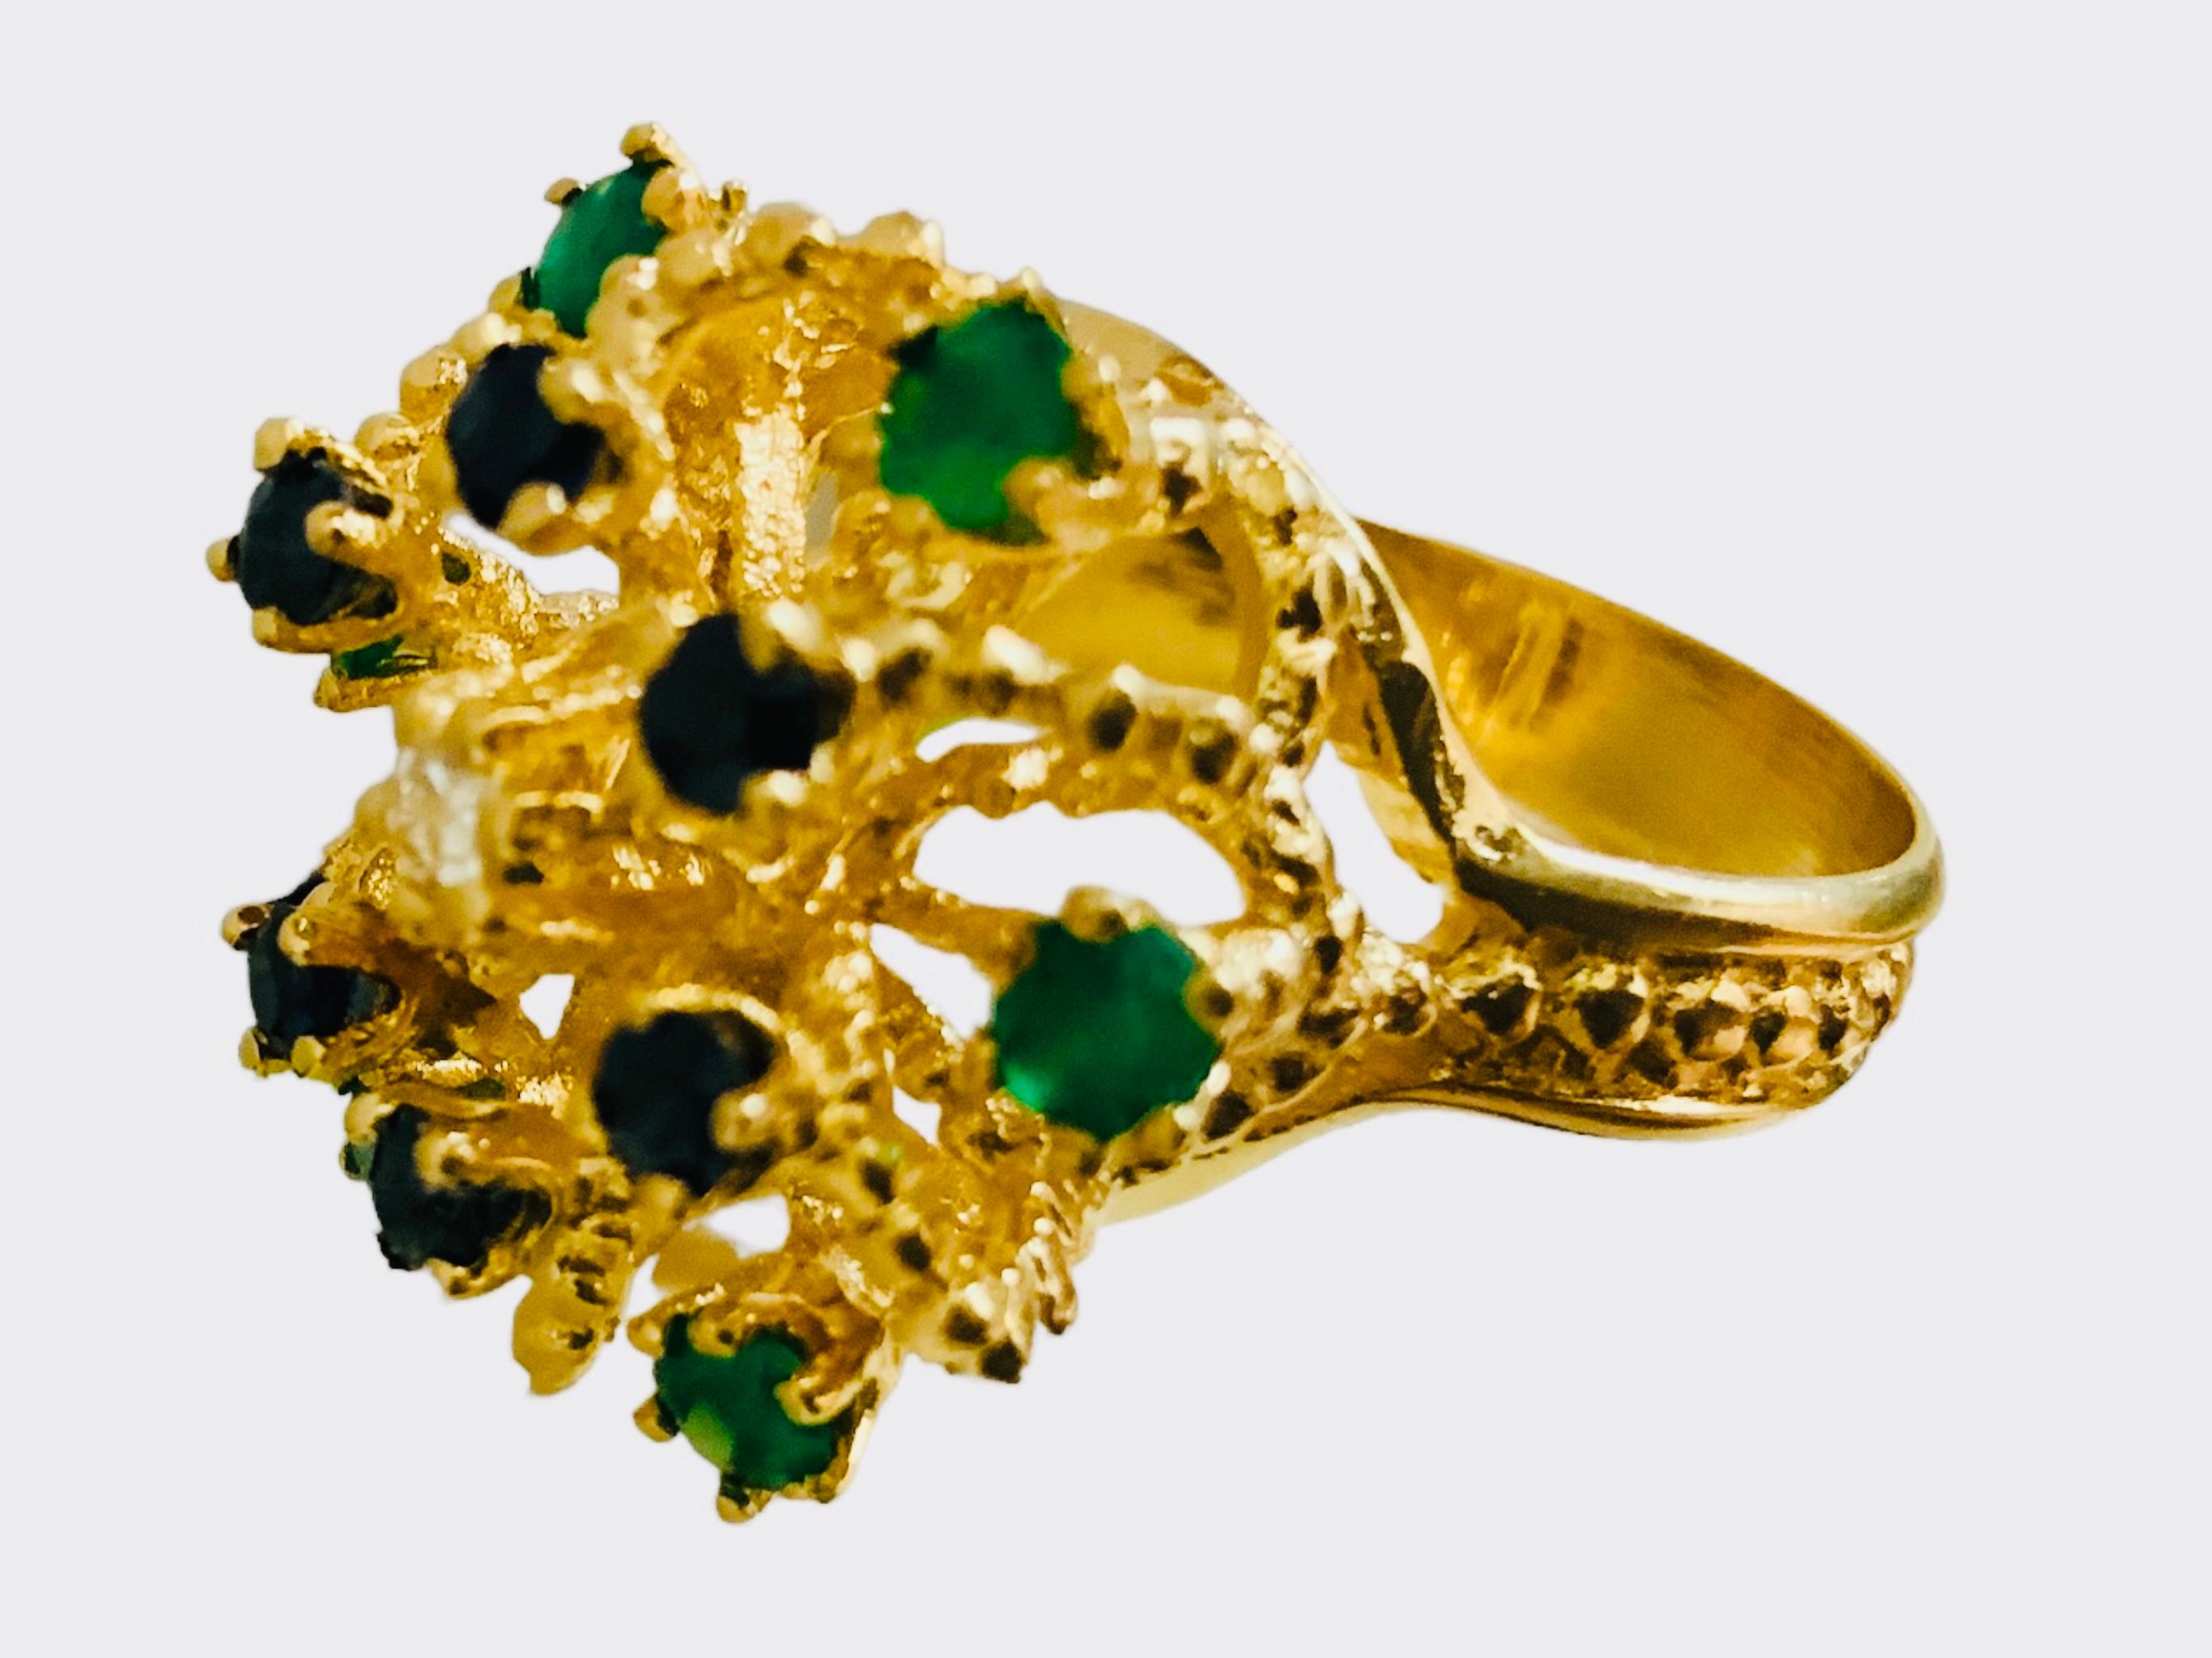 This is a 14K yellow gold Diamond, Emeralds and Sapphires cocktail ring. It depicts a crown like setting with two tiers. The lower tier is enhanced by six round tiny emeralds in prong setting and the higher tier is adorned by six round tiny